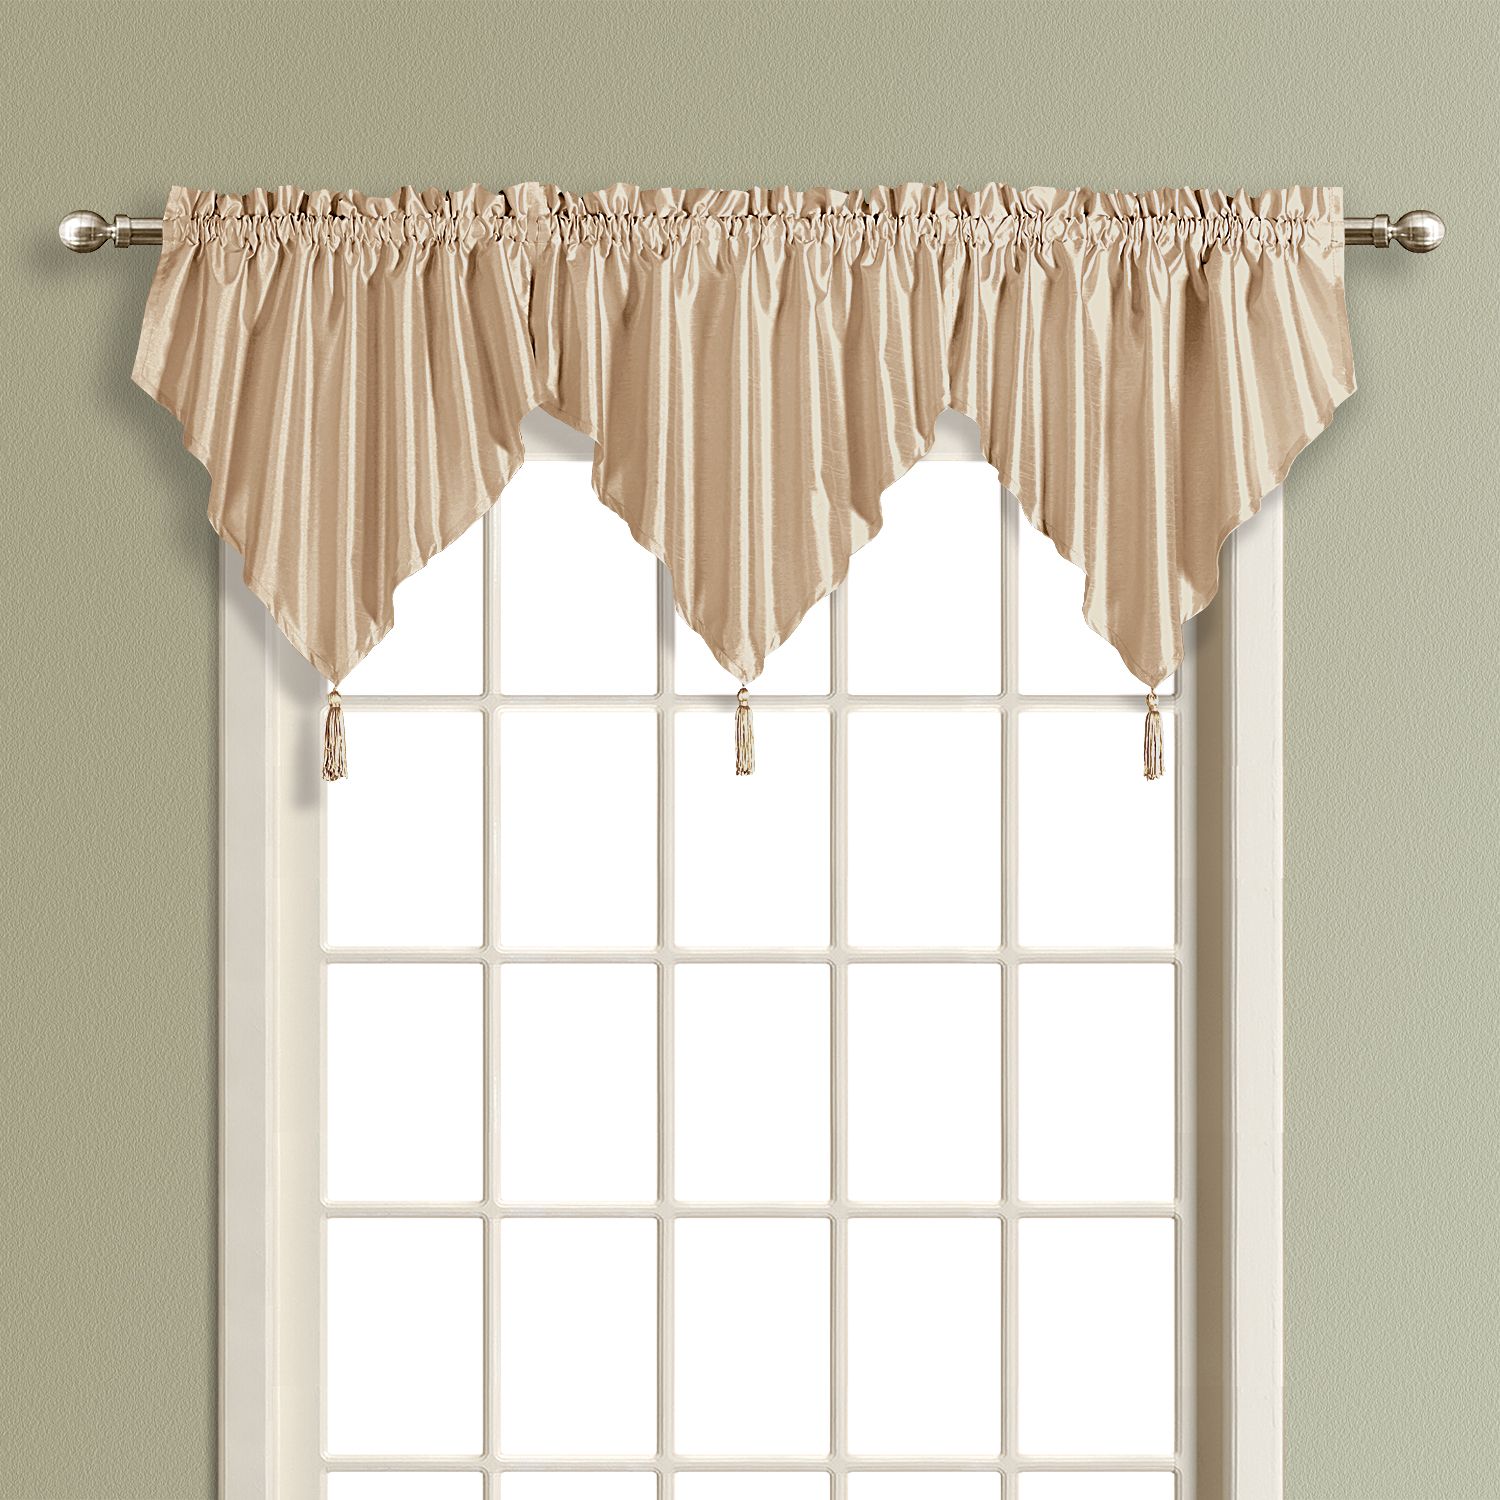 United Curtain Company Anna 42X24 faux silk ascot valance: white, natural, sage, taupe, blue, gold, burgundy & chocolate